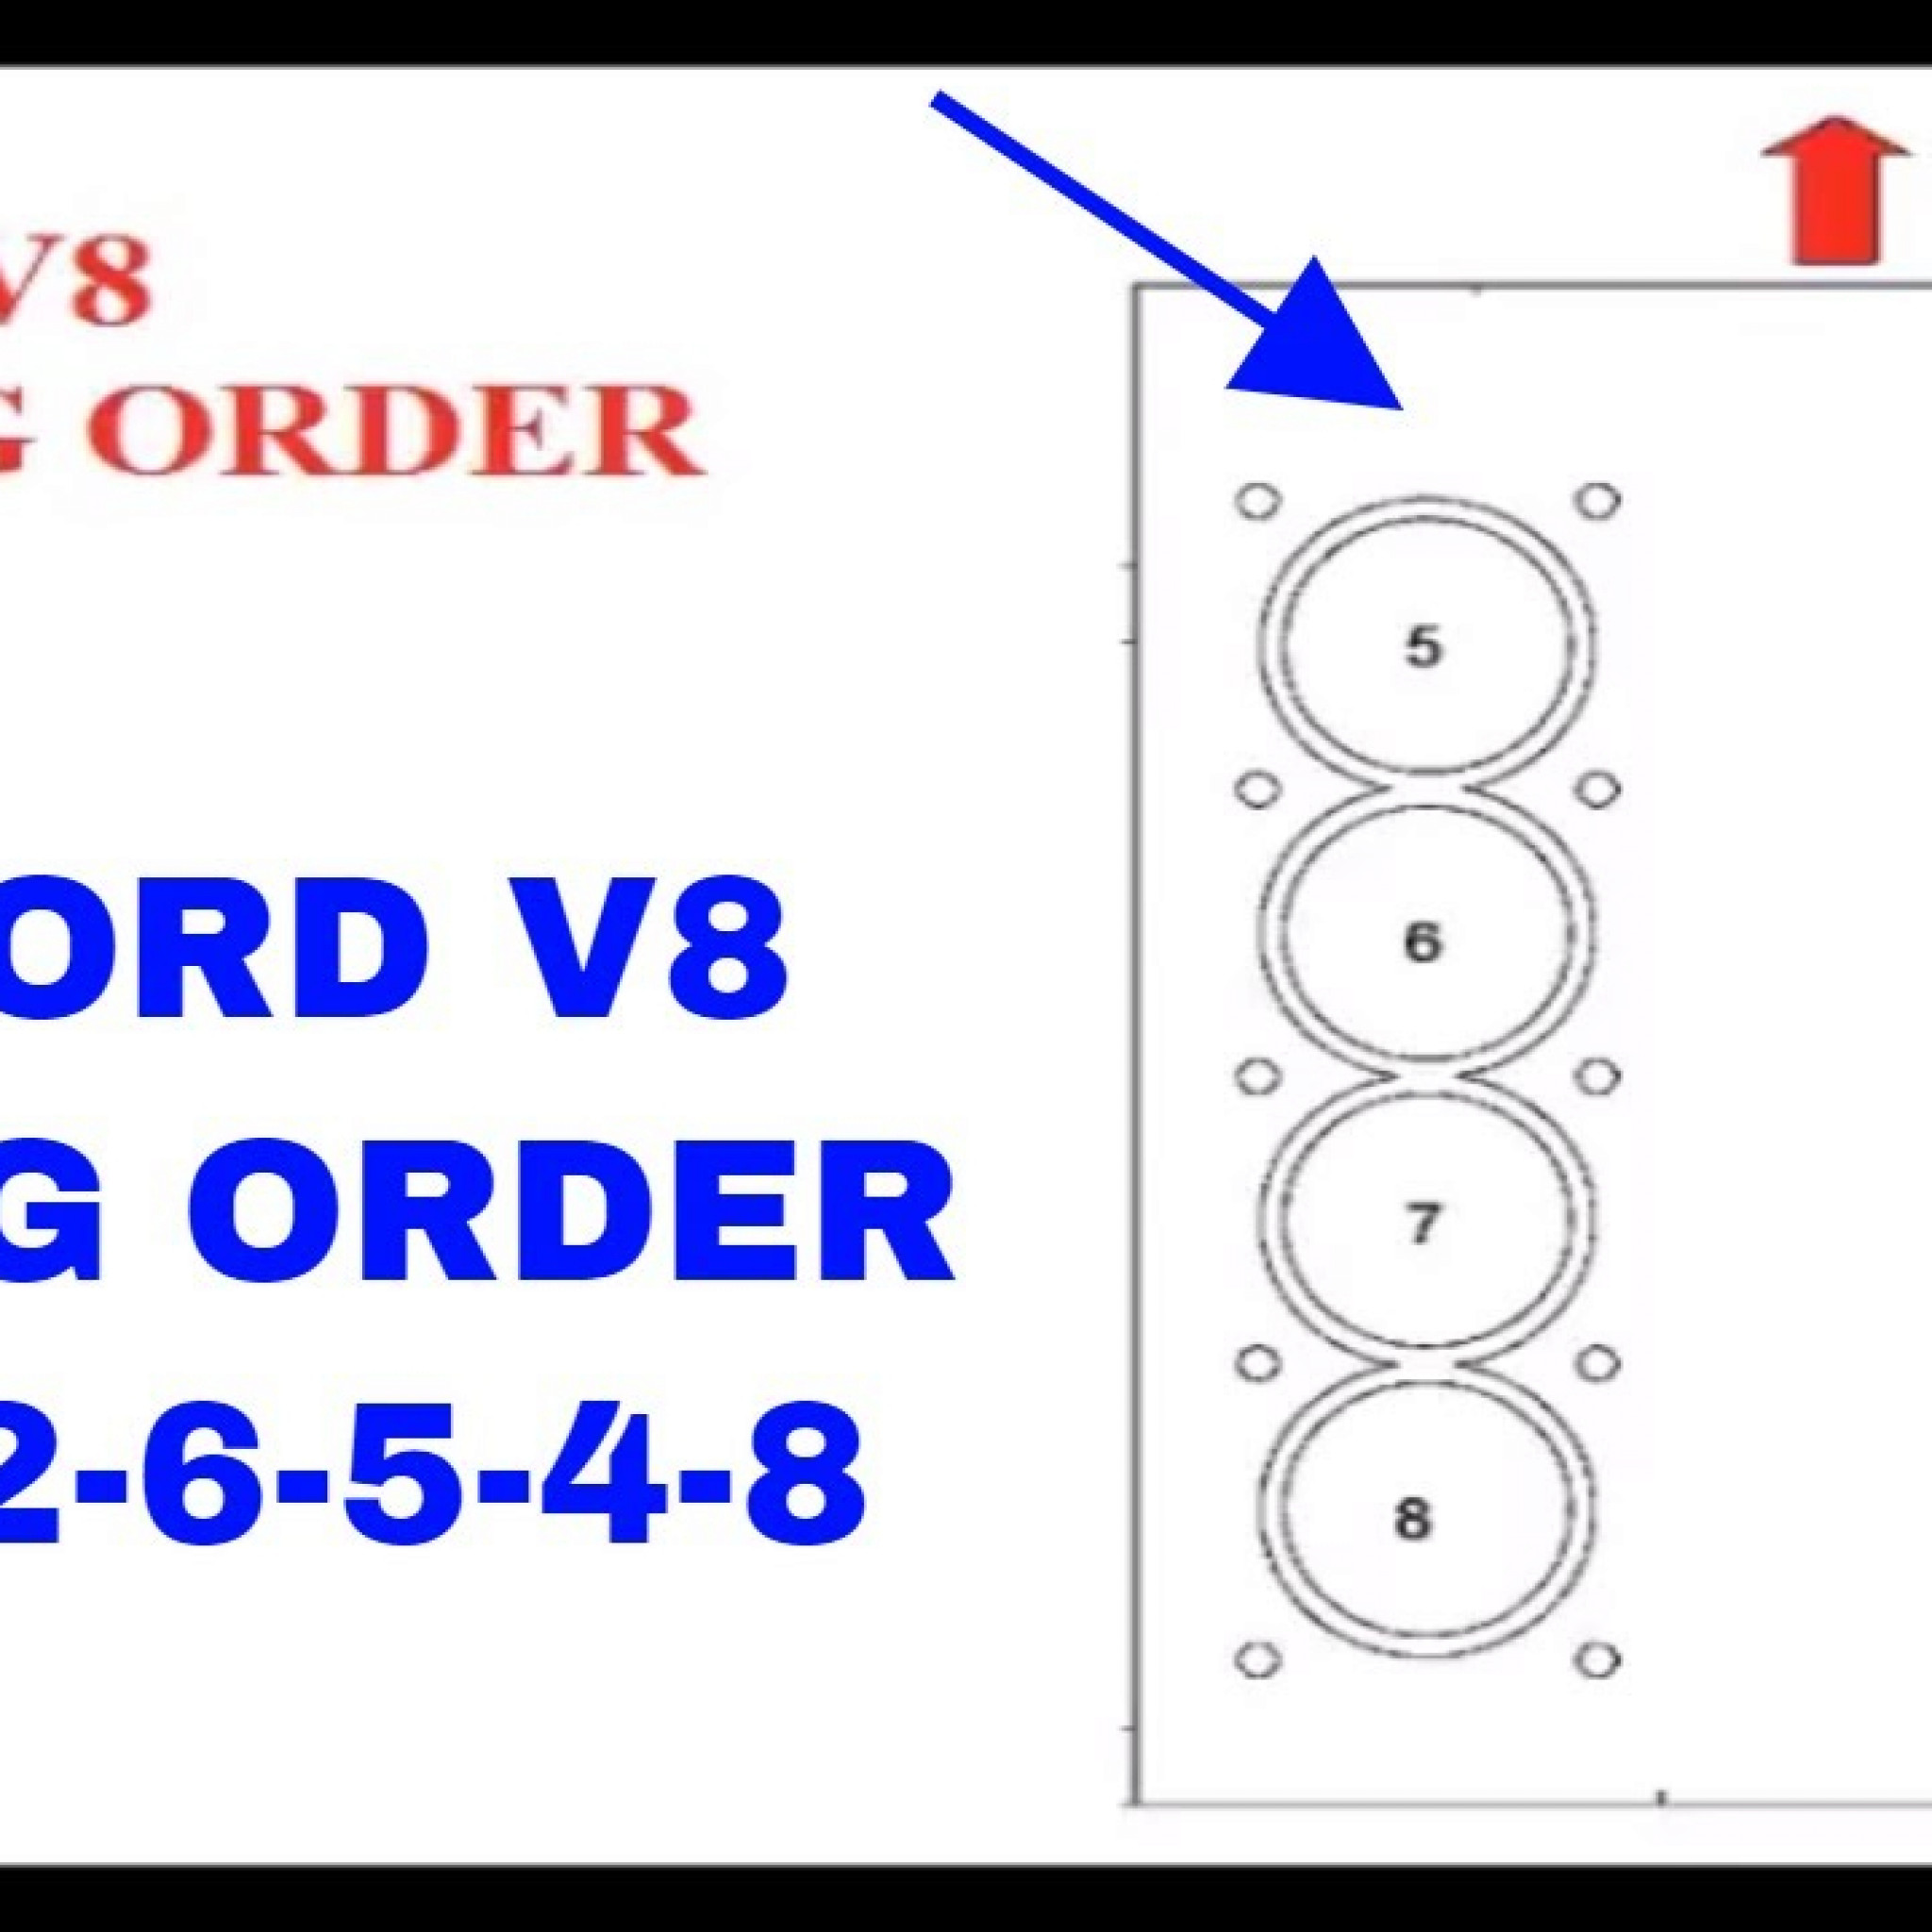 2004 Ford Explorer Firing Order | Wiring and Printable